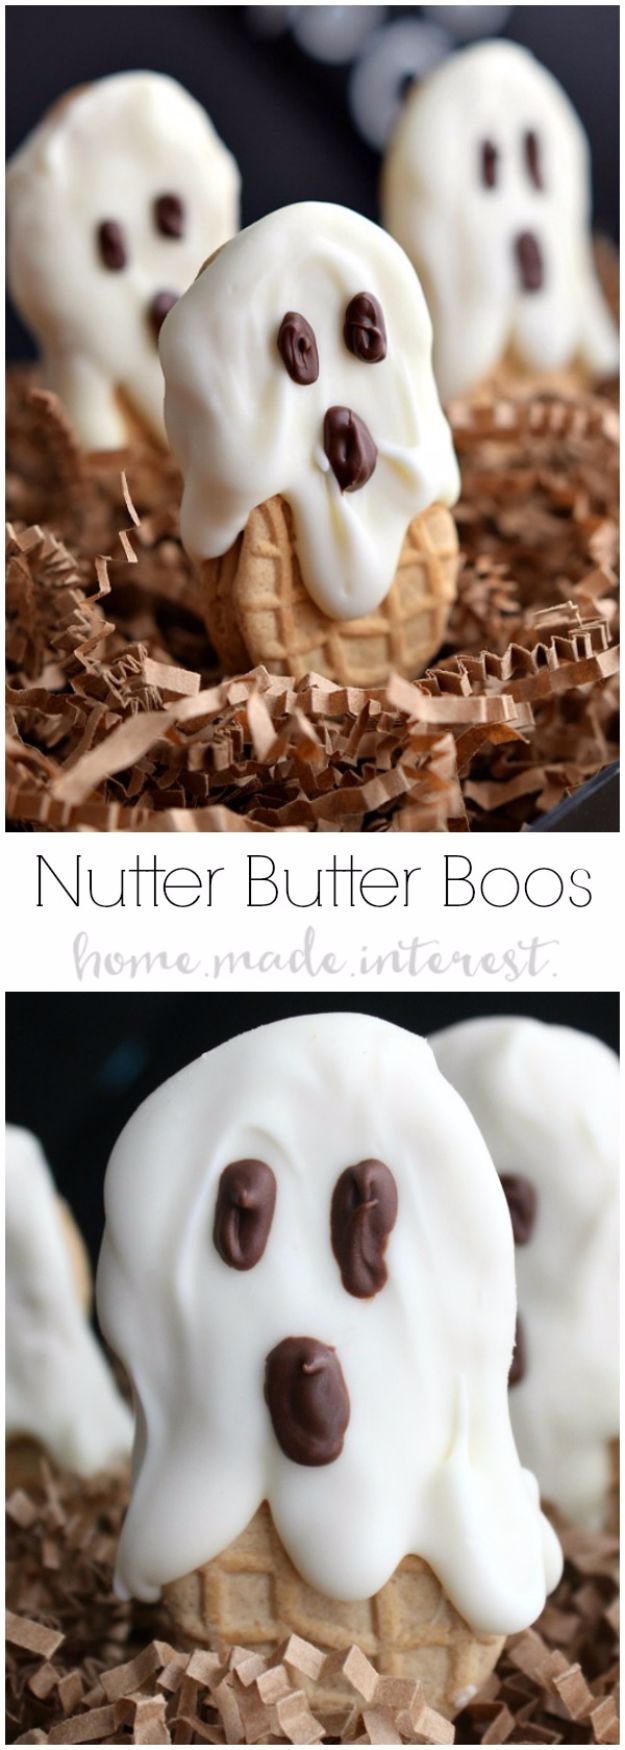 Cute Halloween Cookies - Nutter Butter Boos - Easy Recipes and Cookie Tutorials for Making Quick Halloween Treats - Spooky DIY Decorated Ghosts, Pumpkins, Bats, No Bake, Spiders and Spiderwebs, Tombstones and Healthy Options, Kids and Teens Cookies for School #halloween #halloweencookies